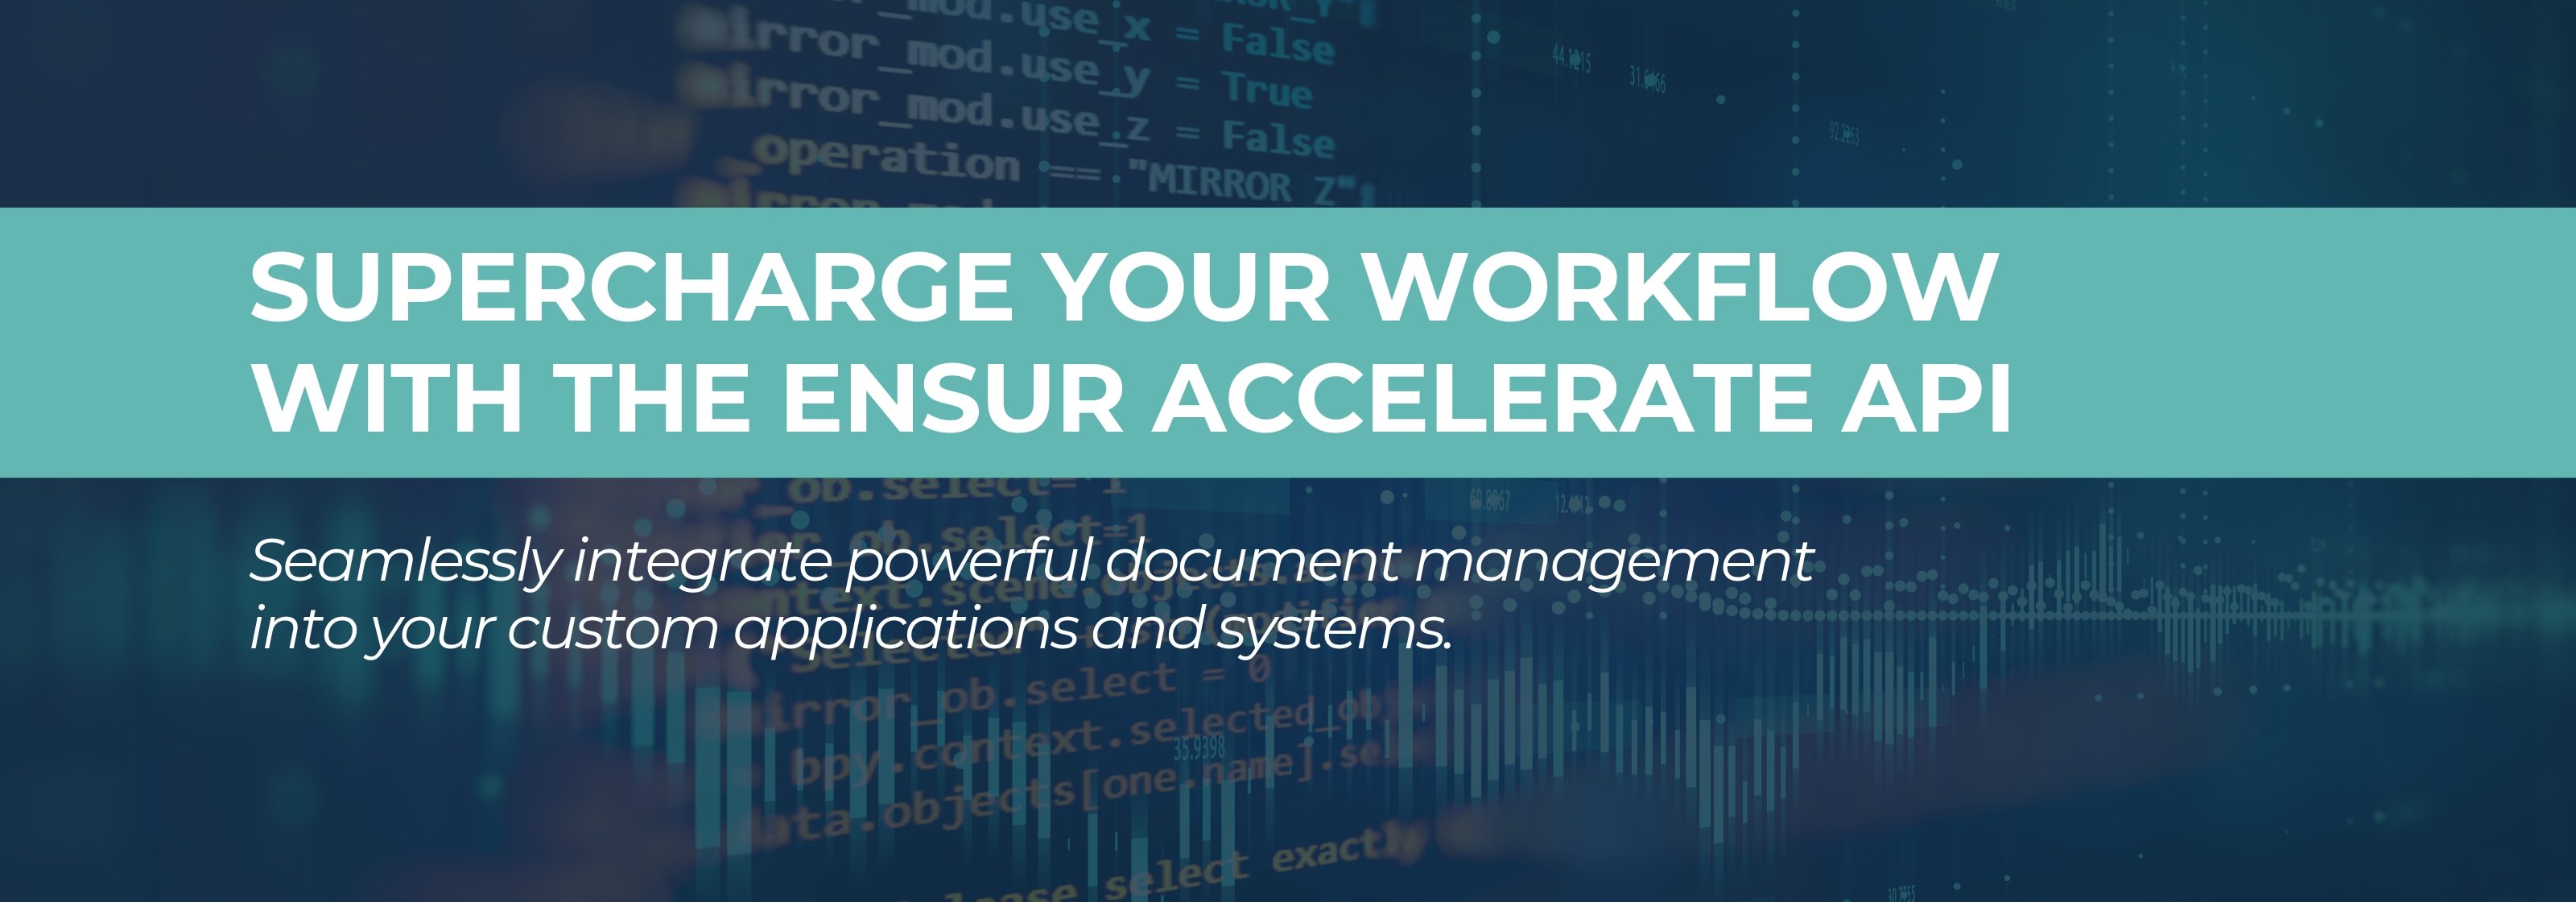 Supercharge Your Workflow with the ENSUR Accelerate API